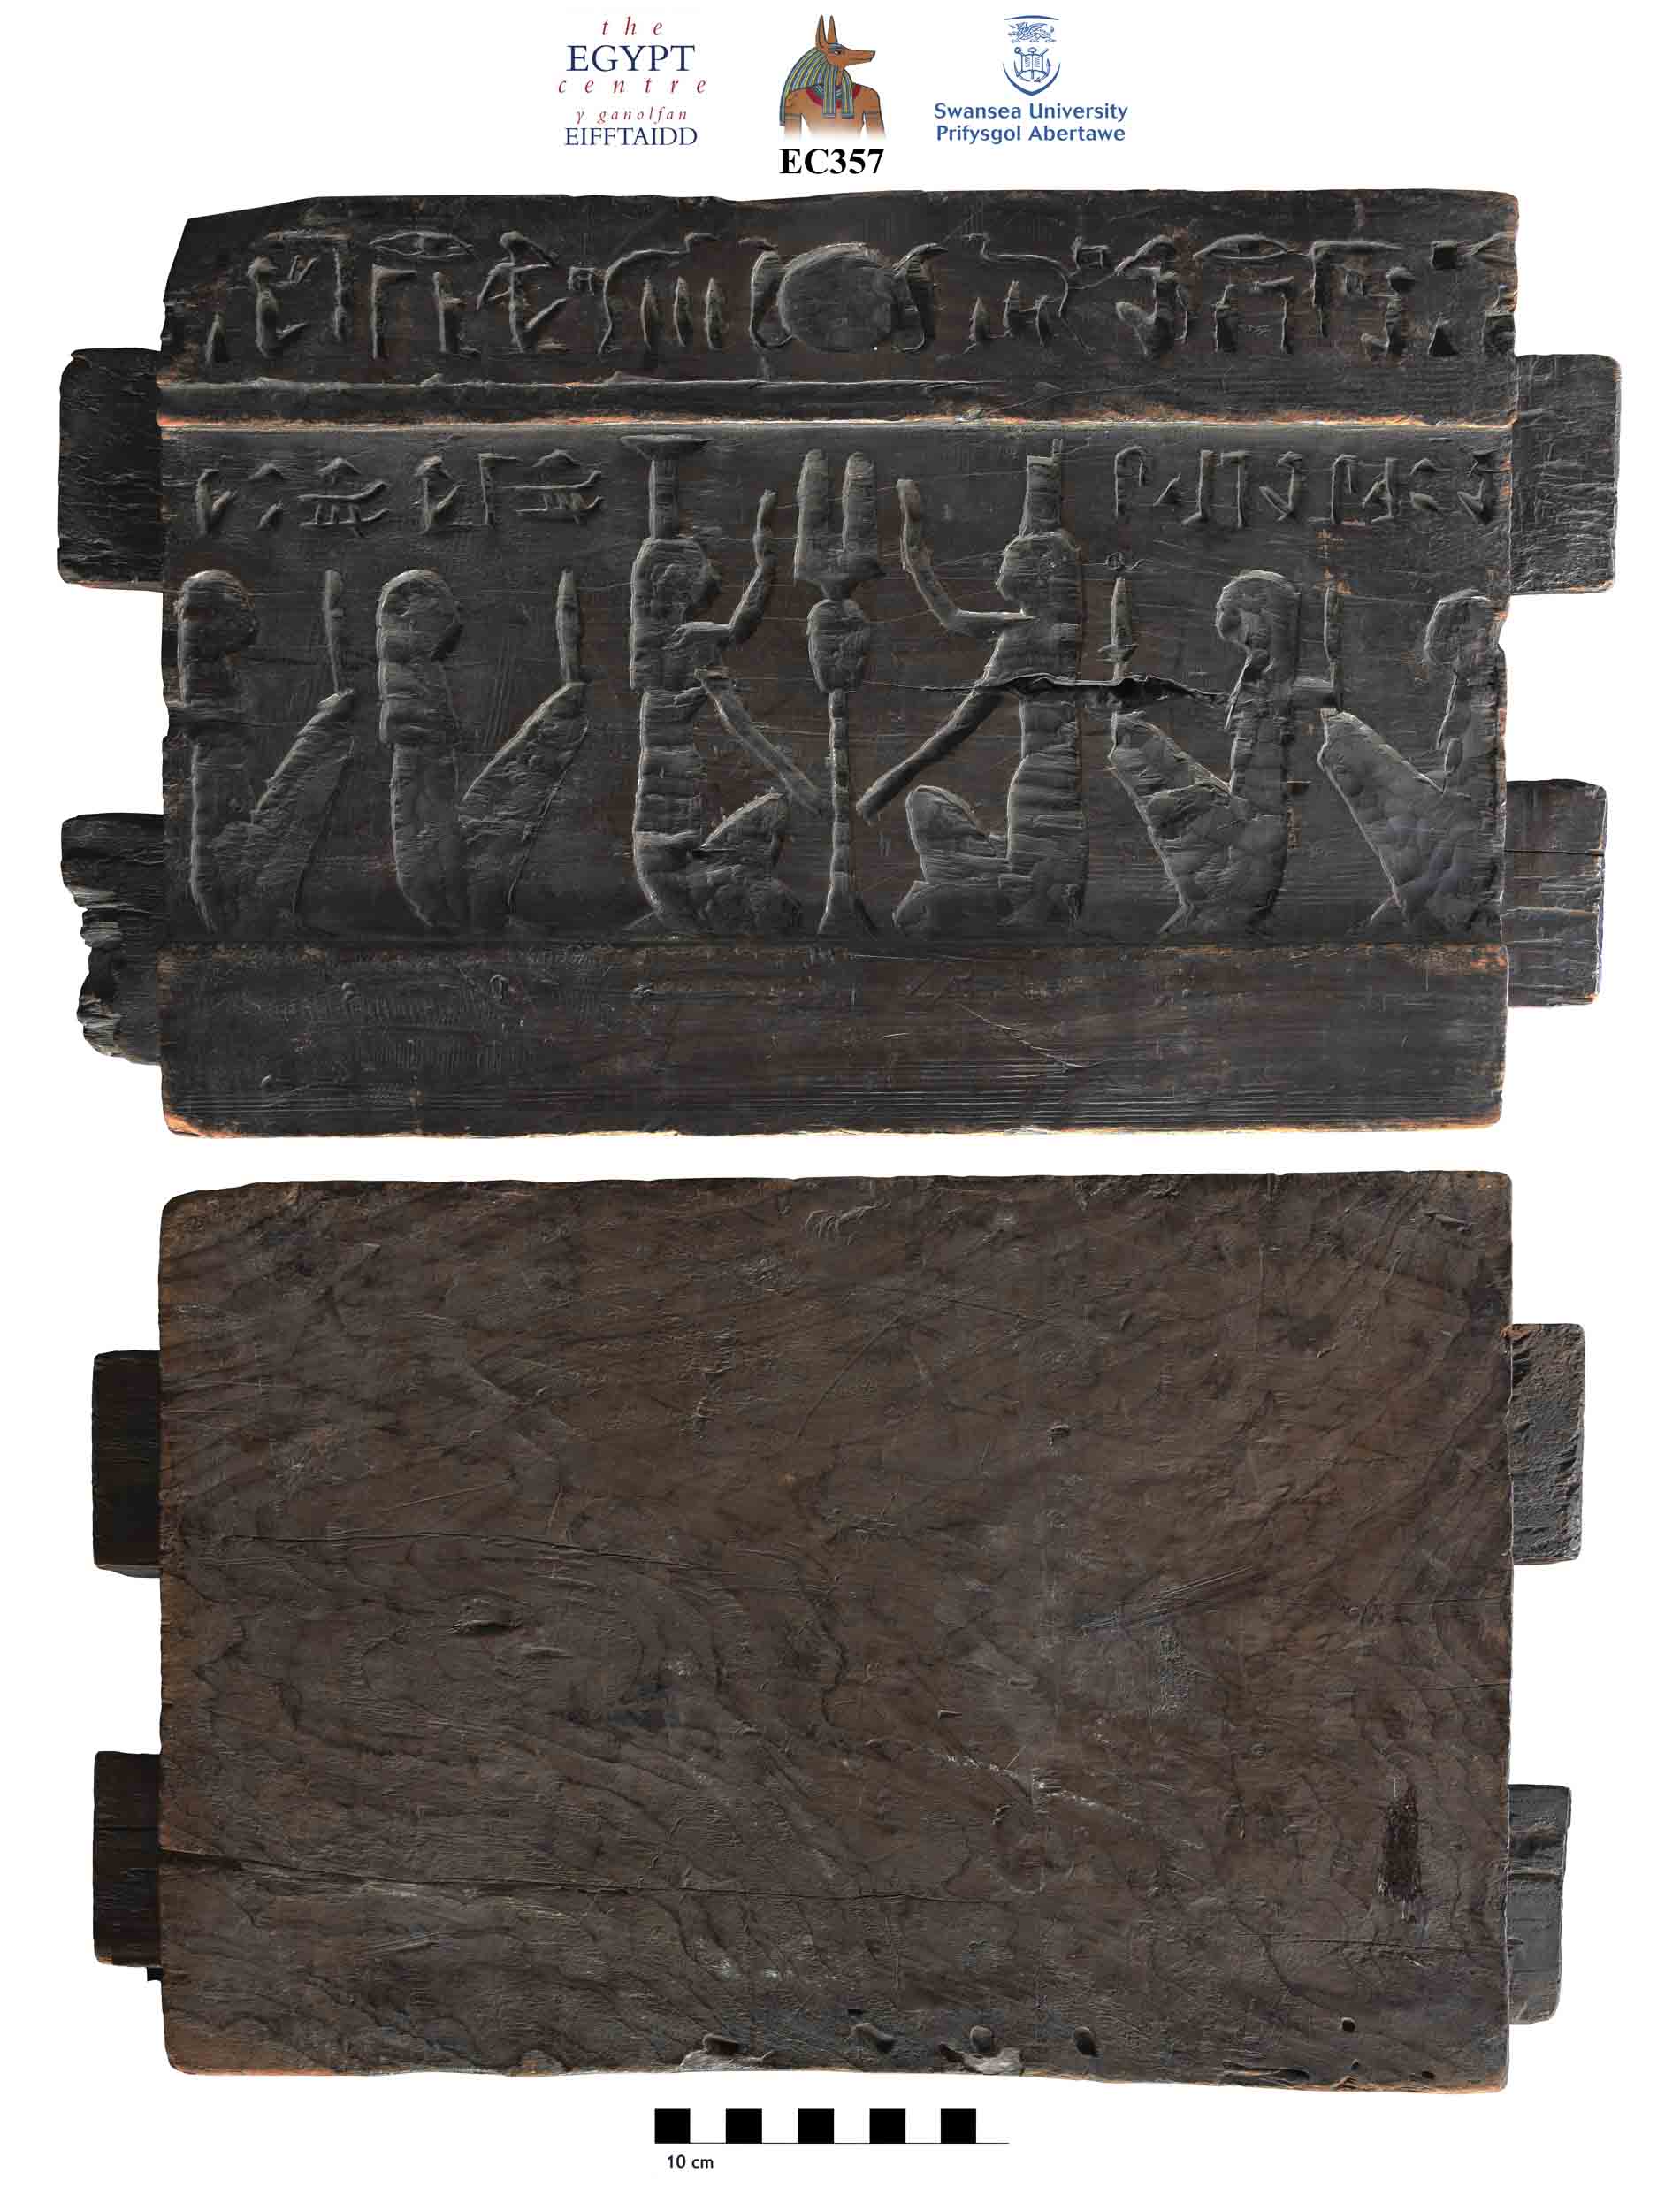 Image for: Sarcophagus fragment